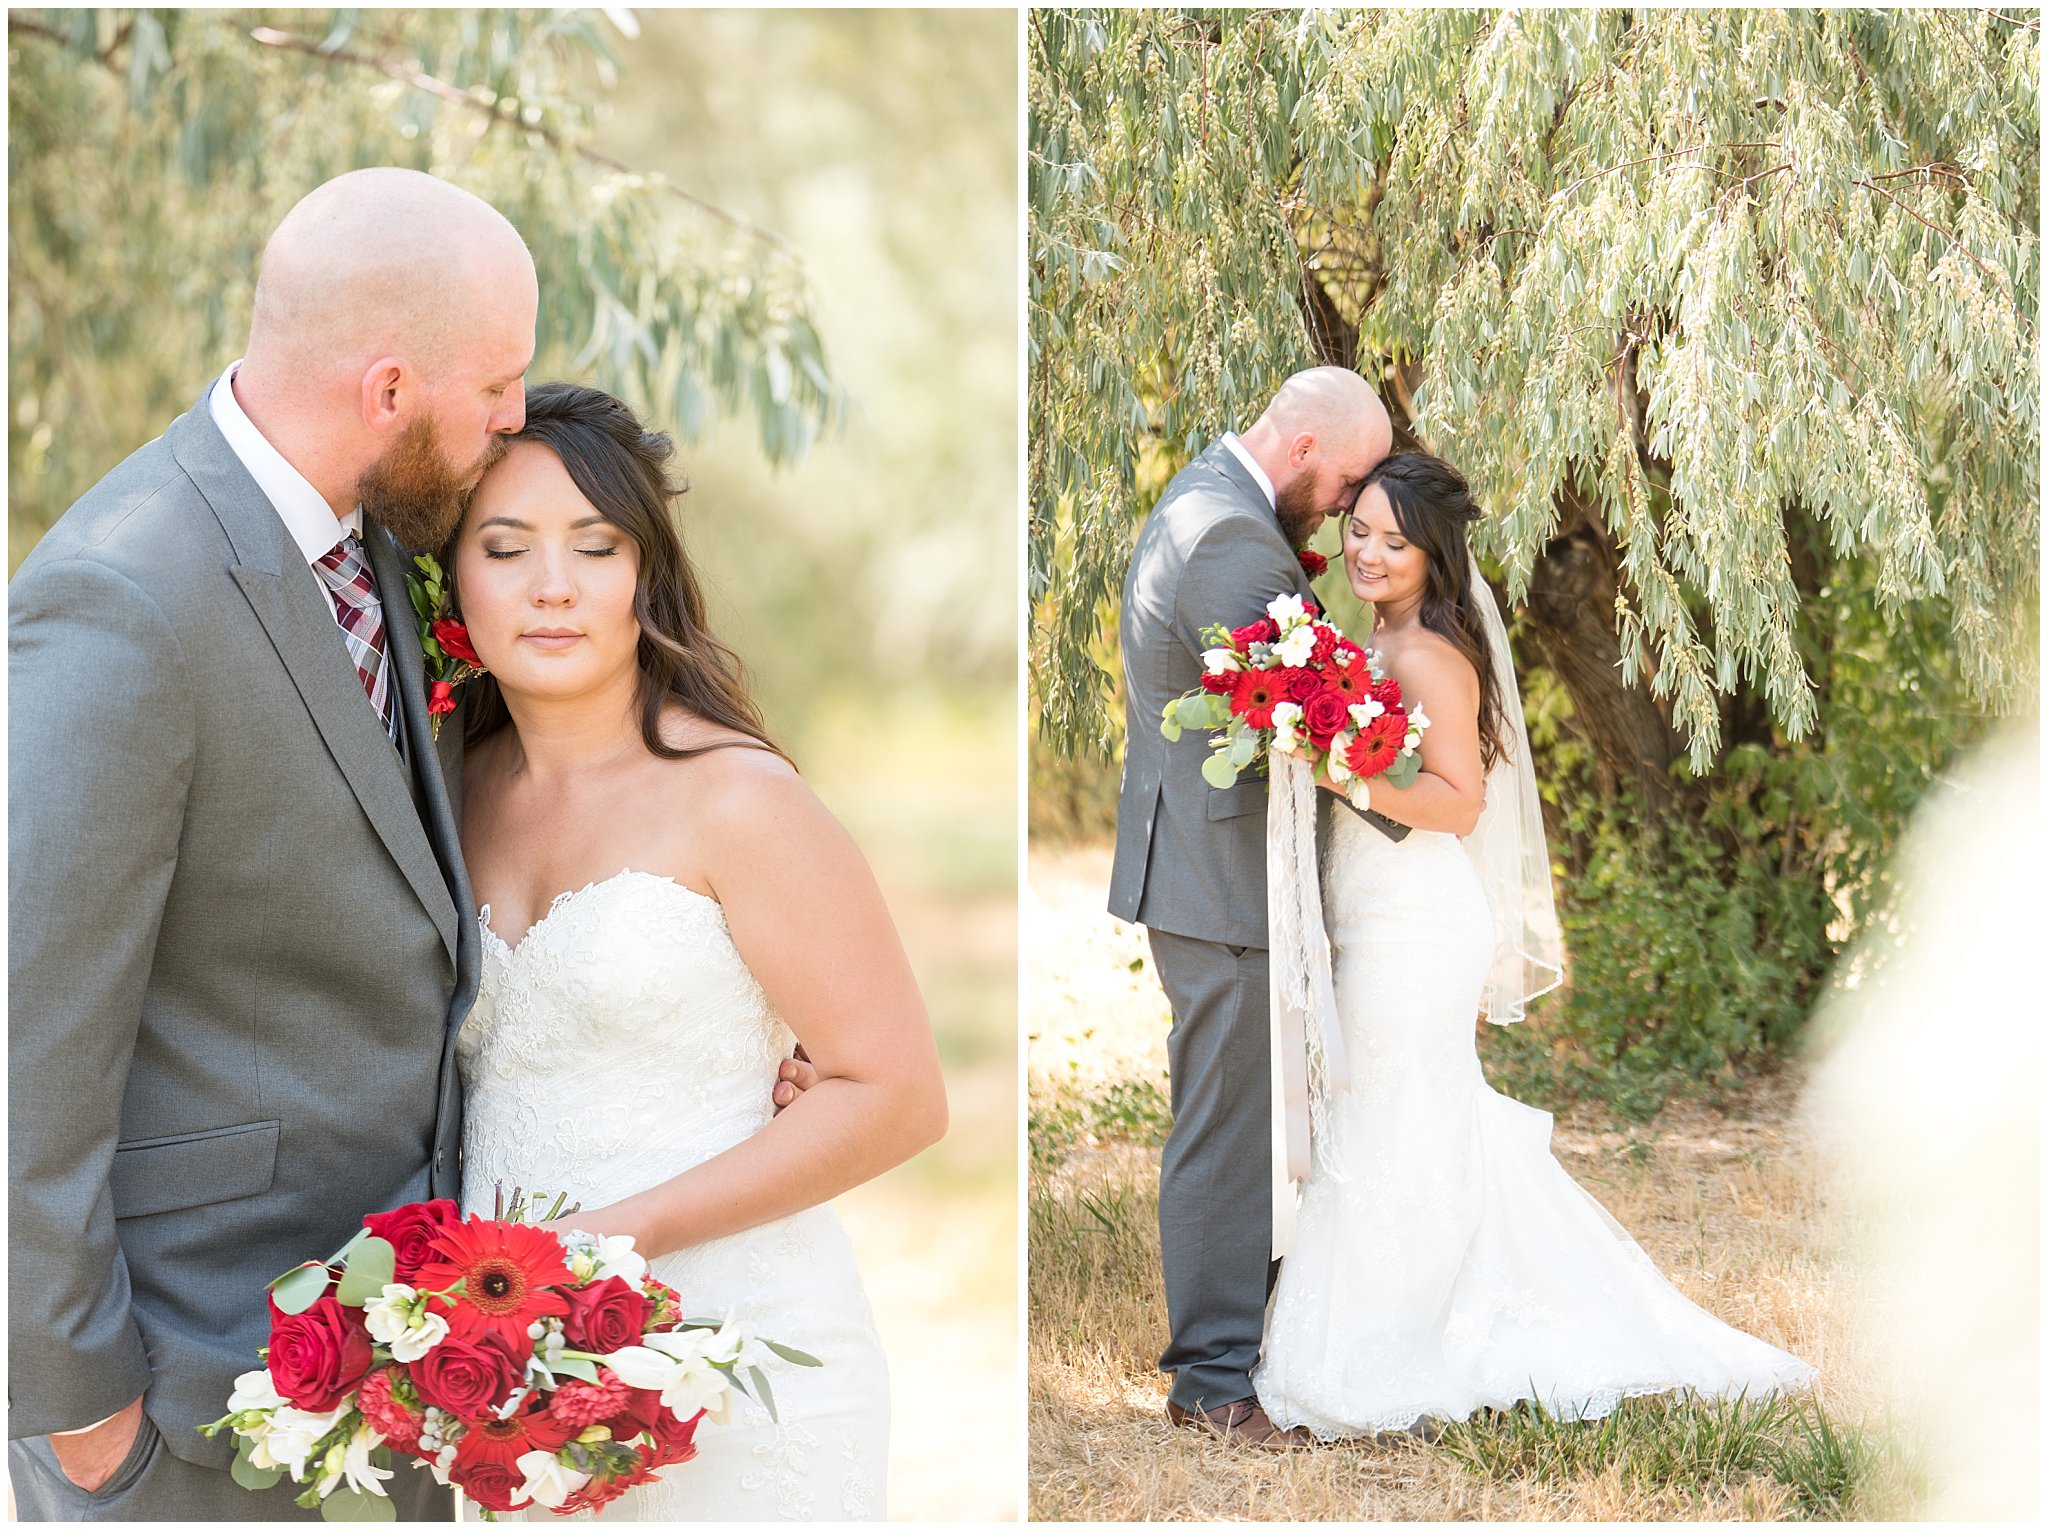 Elegant bride and groom portraits in the trees with red and white bouquet | Davis County Outdoor Wedding | Jessie and Dallin Photography